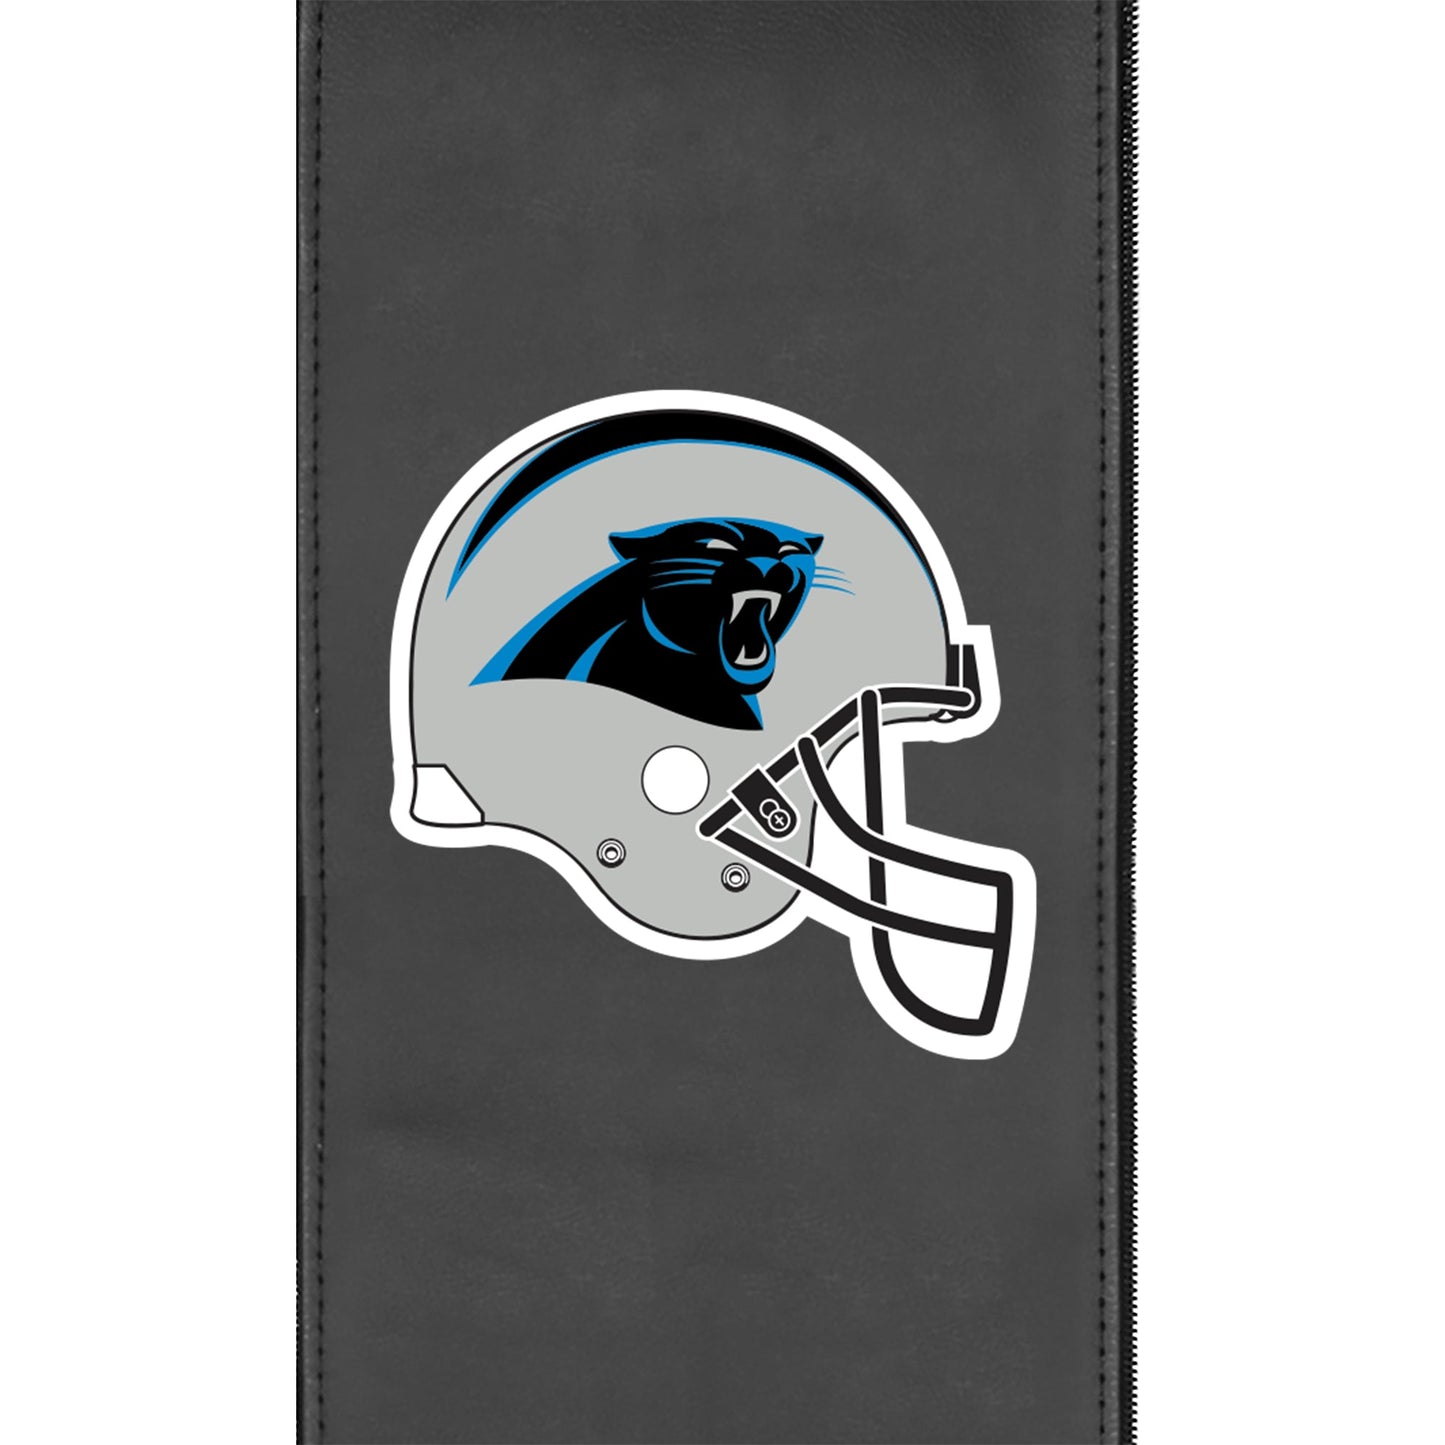 Relax Home Theater Recliner with  Carolina Panthers Helmet Logo